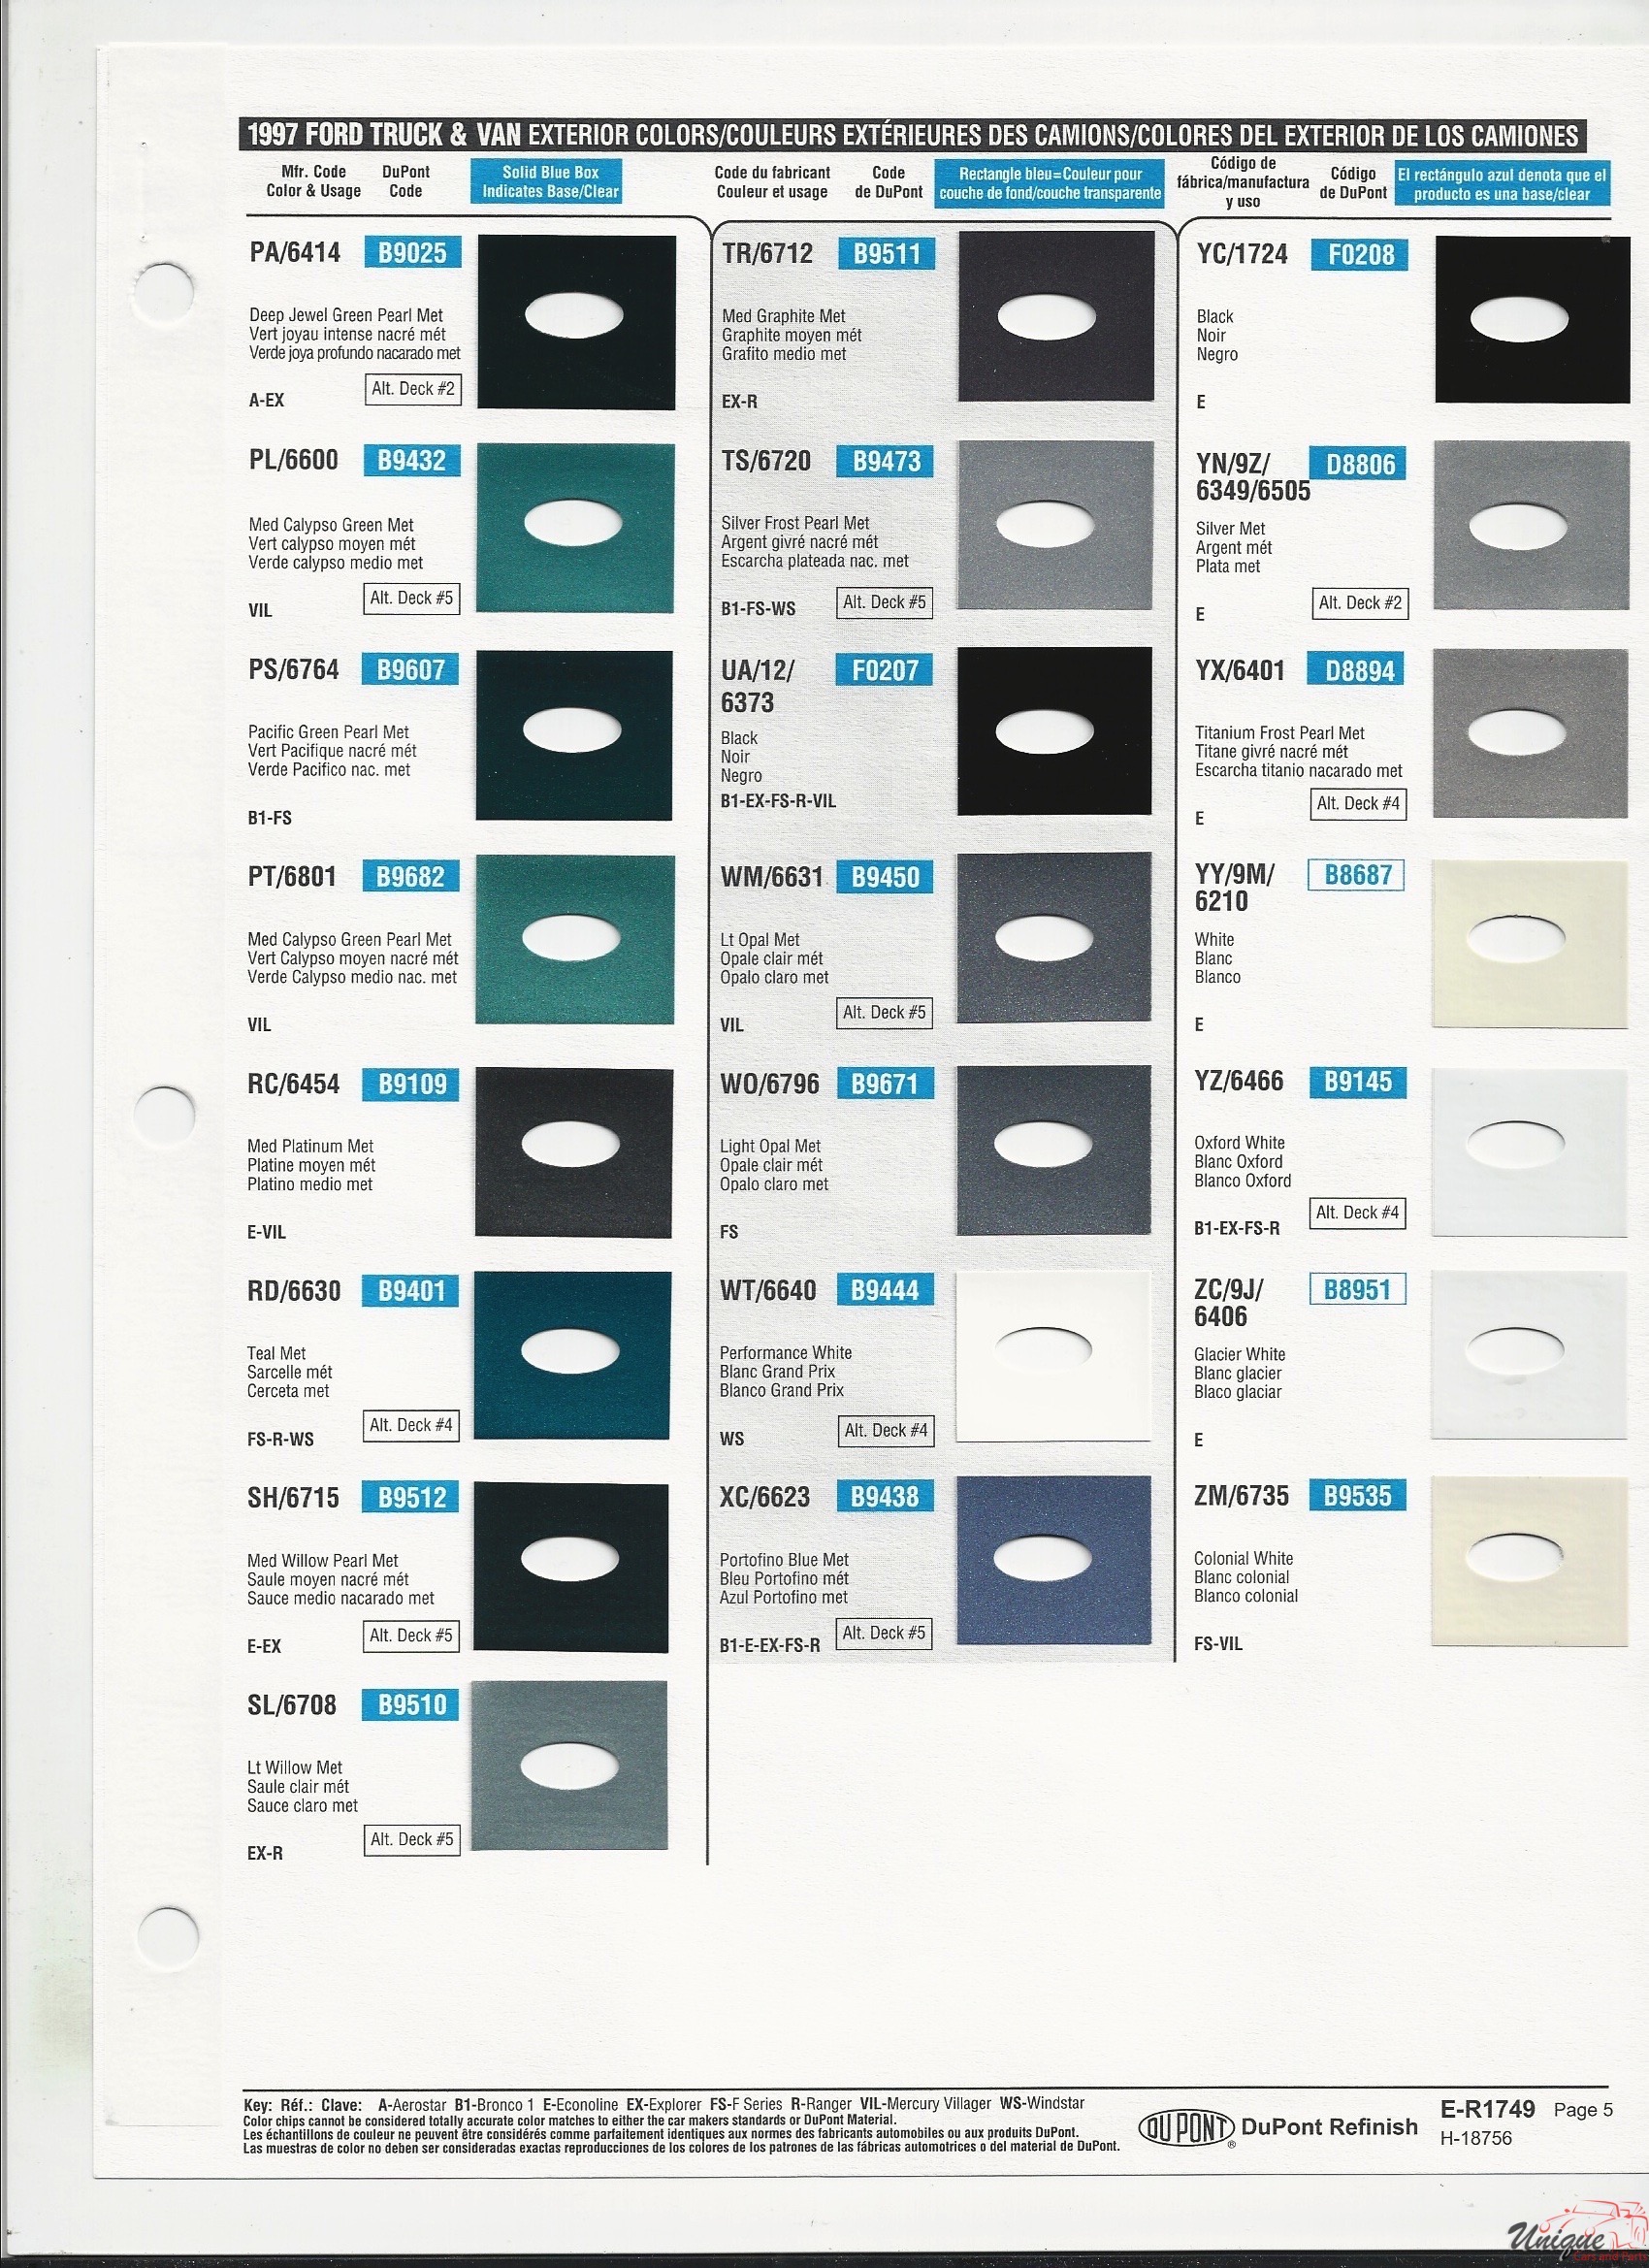 1997 Ford-4 Paint Charts